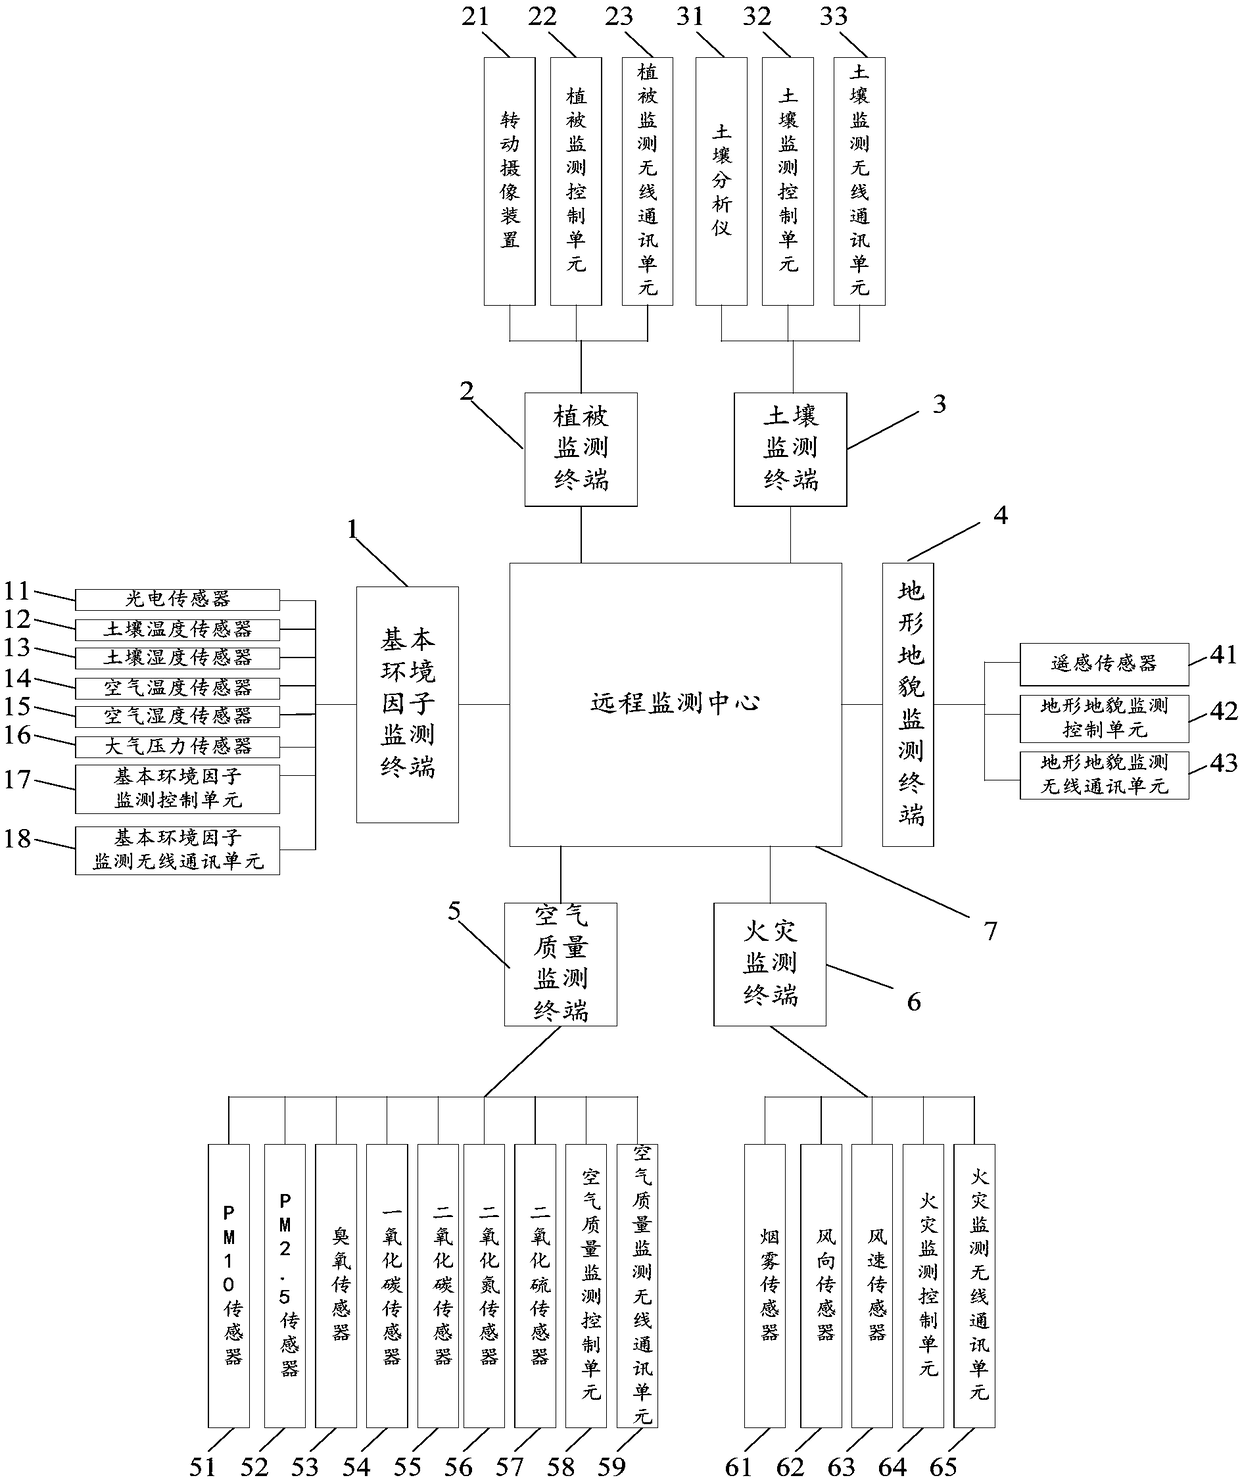 Environment monitoring method for monitoring forest growth condition